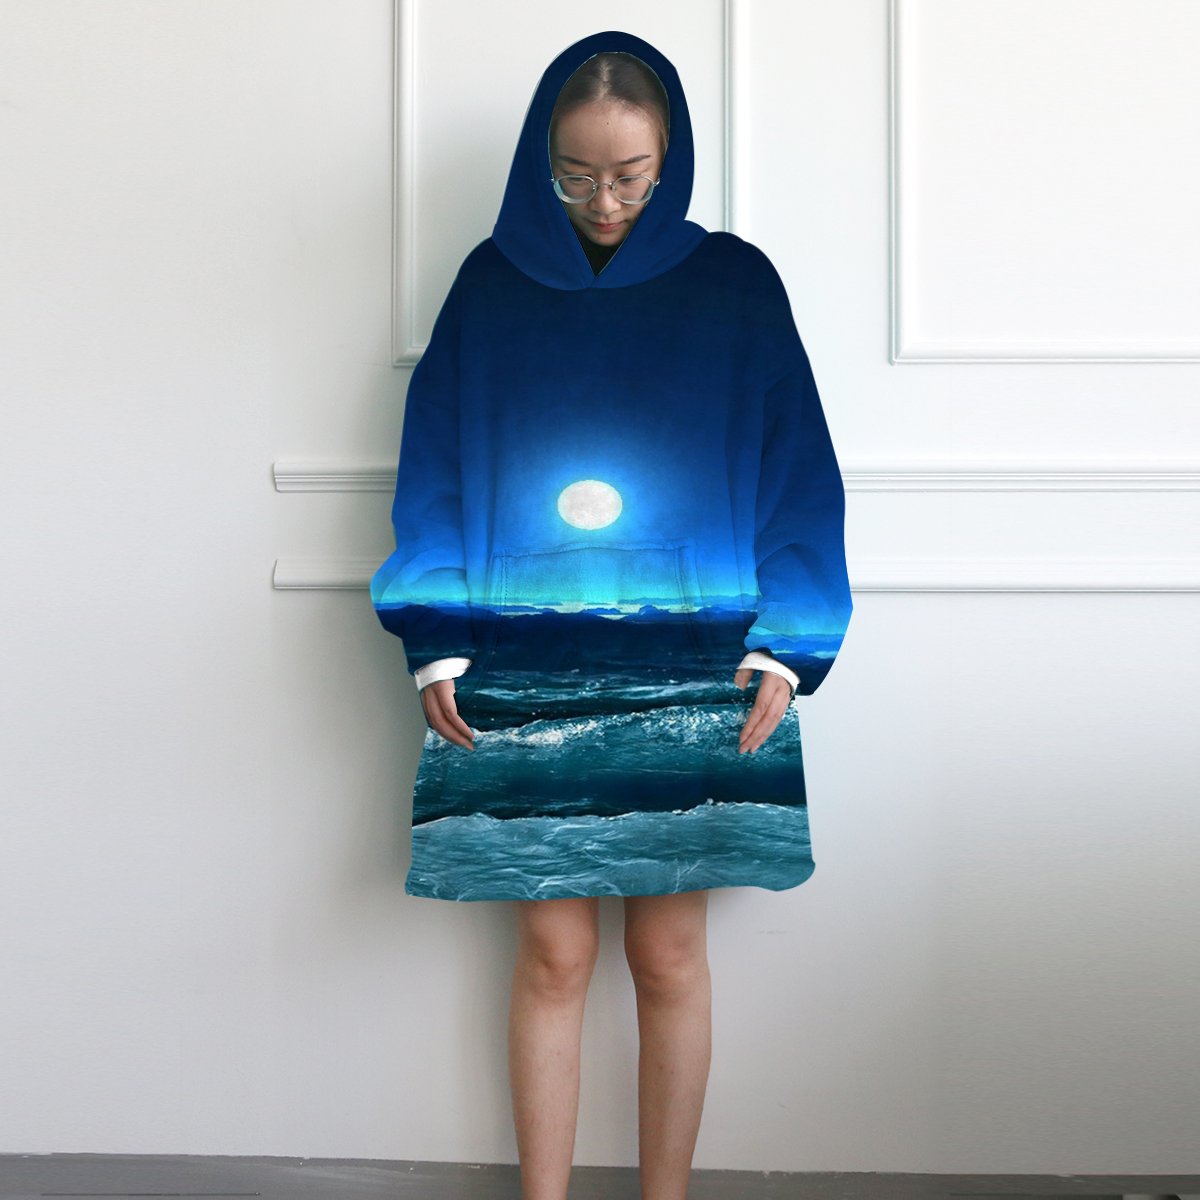 Wearable Blanket Hoodie - Moonlight Magic by Coastal Passion